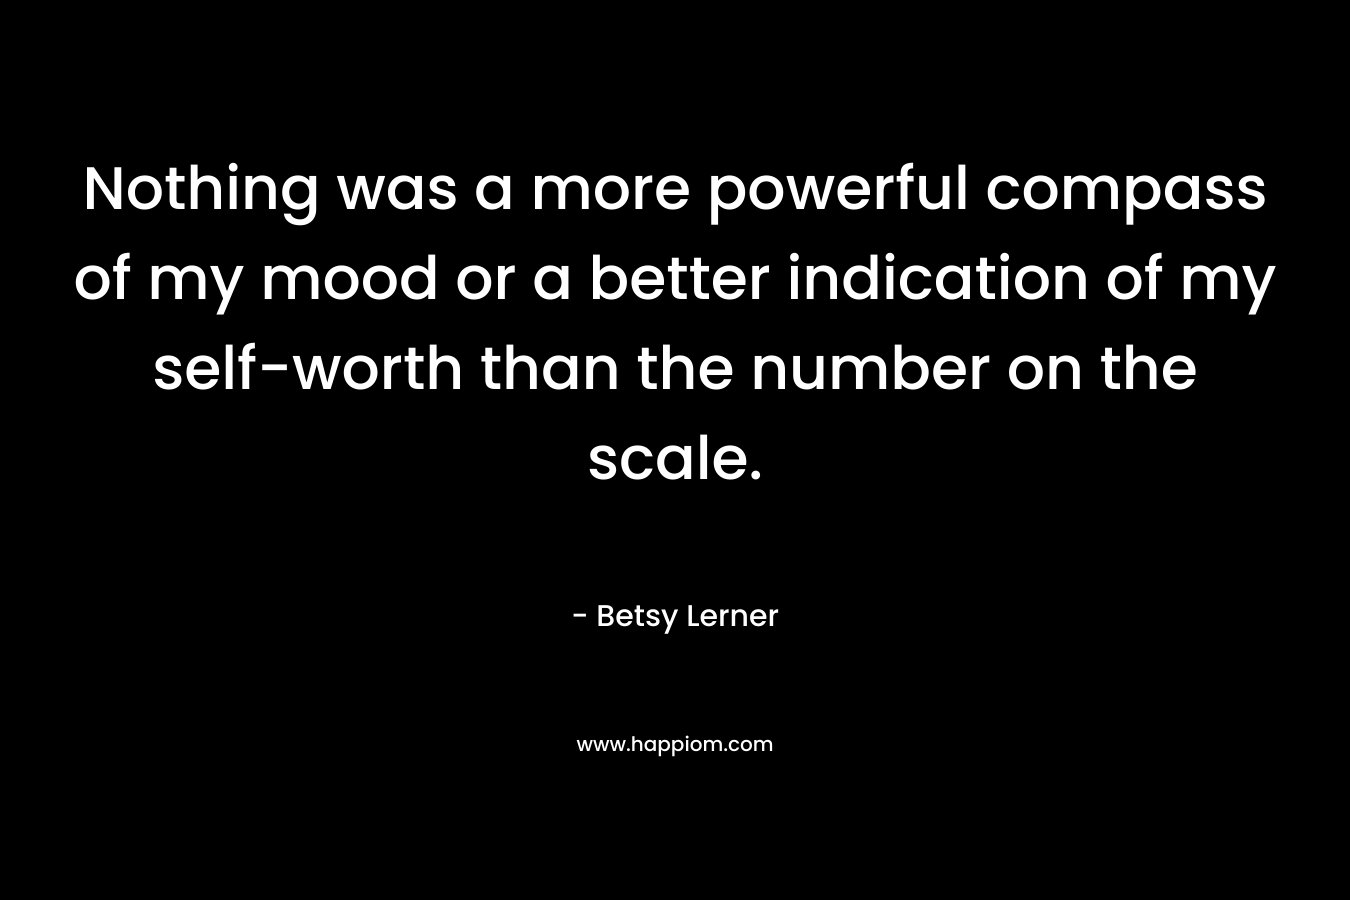 Nothing was a more powerful compass of my mood or a better indication of my self-worth than the number on the scale.